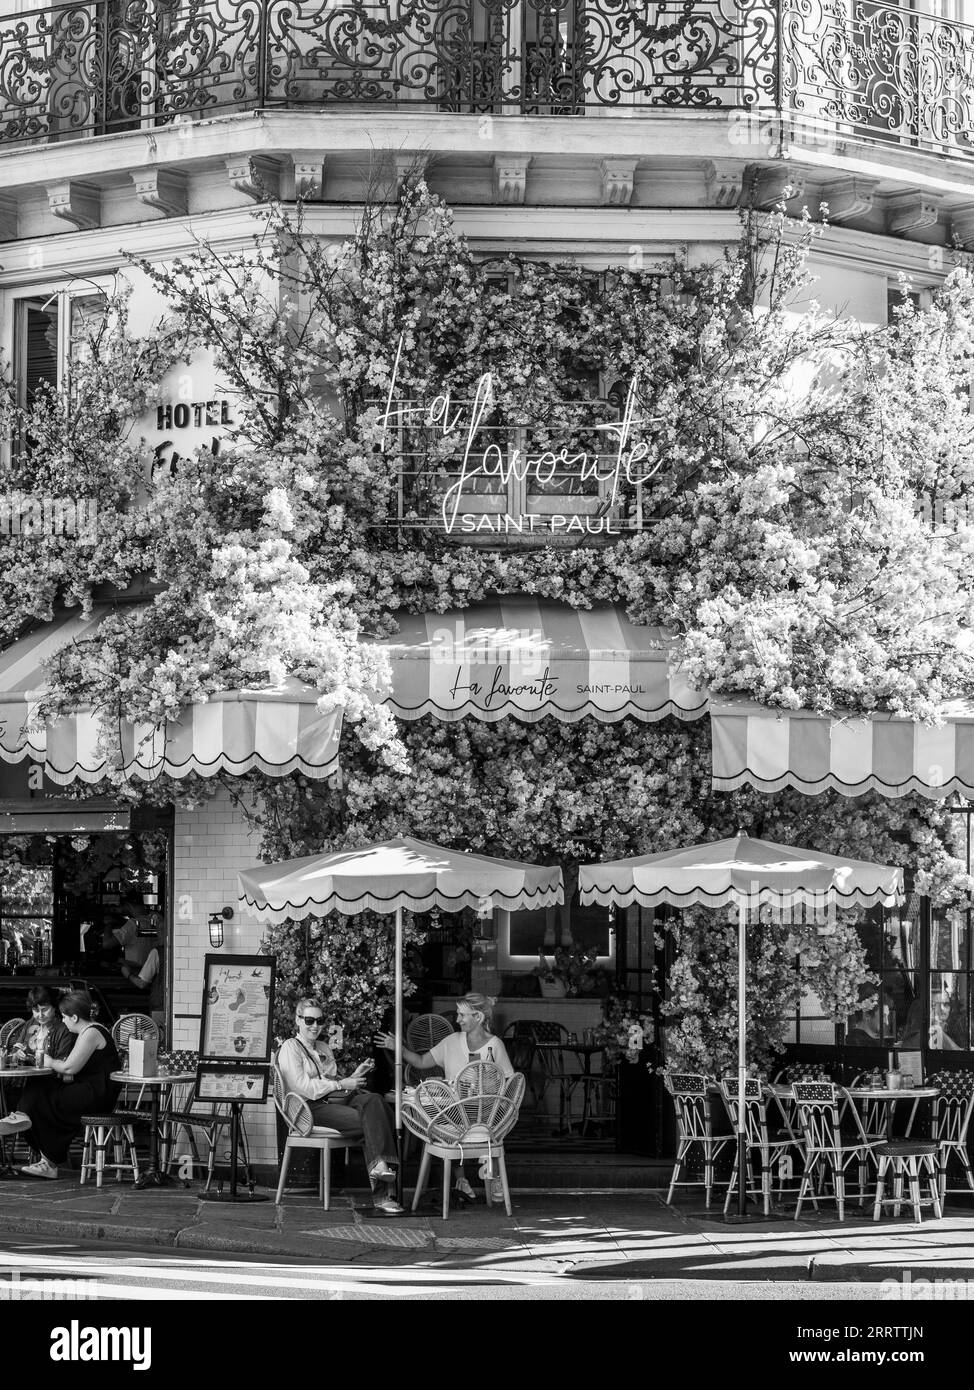 Black and White, La Favorite, Cafe with Pink Flowers, Paris, France, Europe, EU. Stock Photo